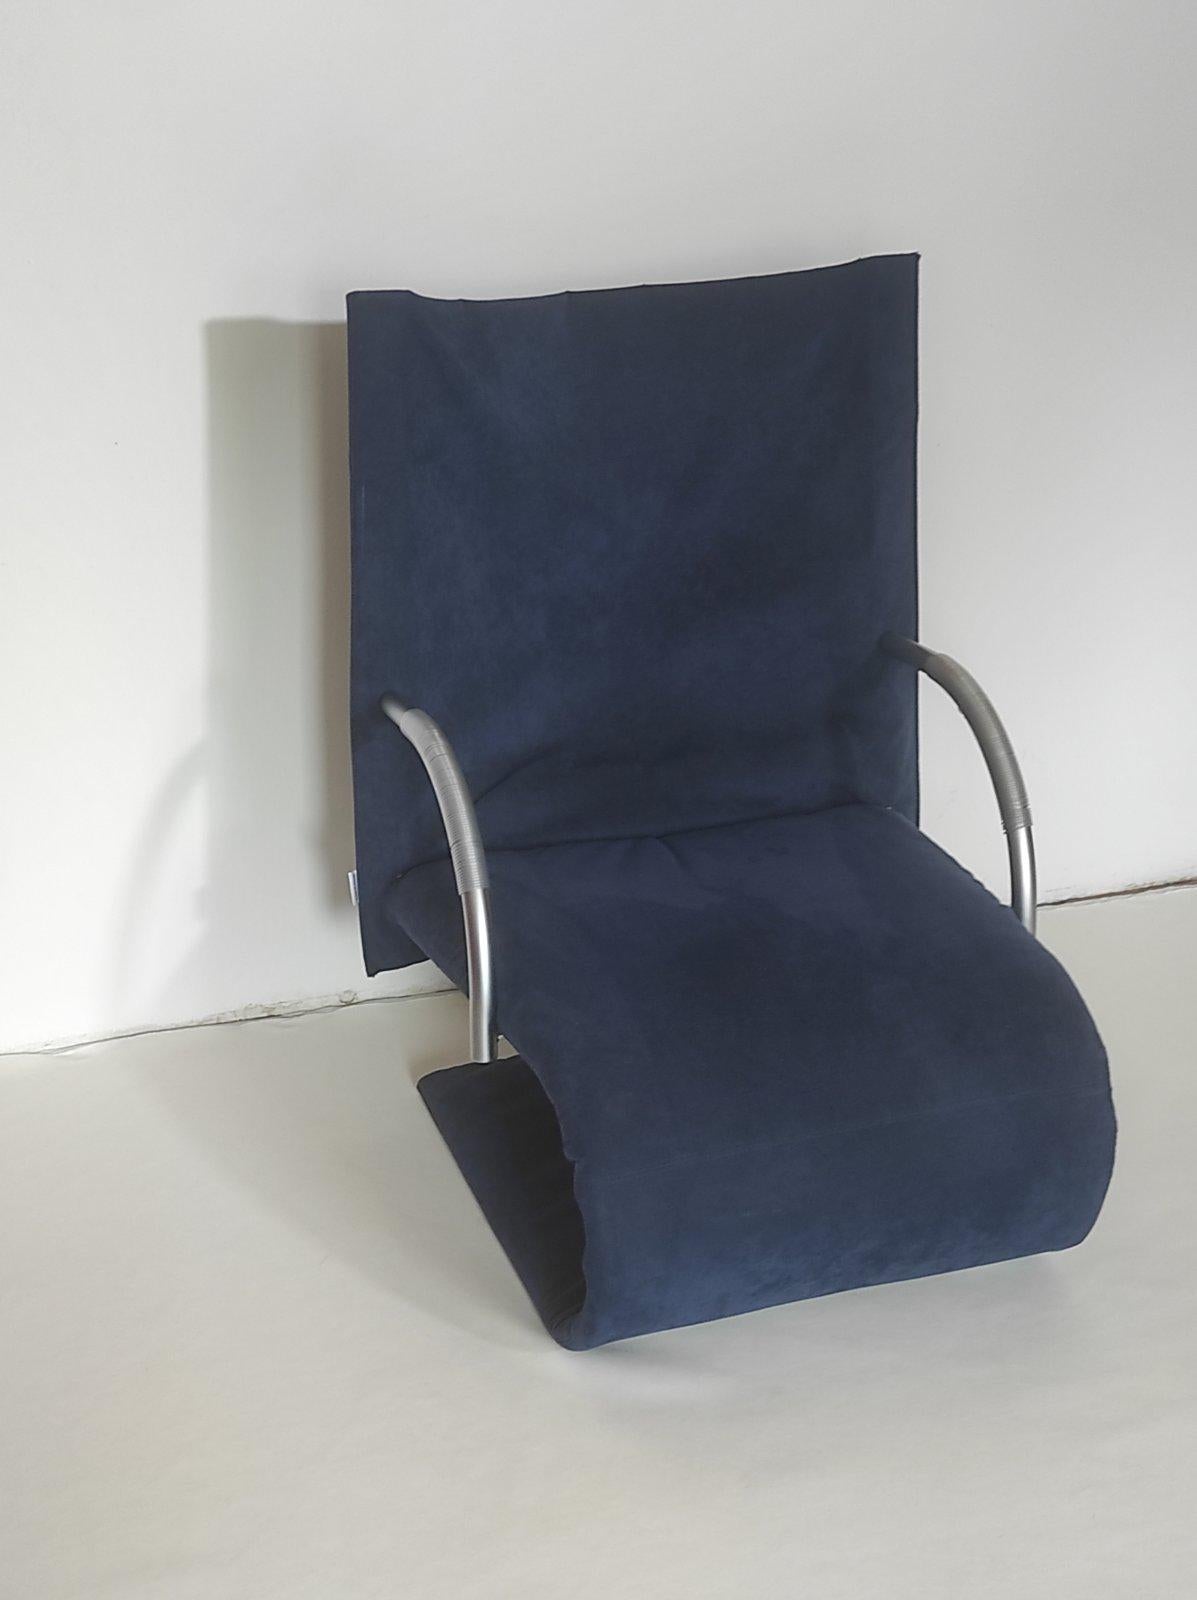 Late 20th Century Postmodern Zen Longue Chair By Claude Brisson for Ligne Roset 1980s For Sale